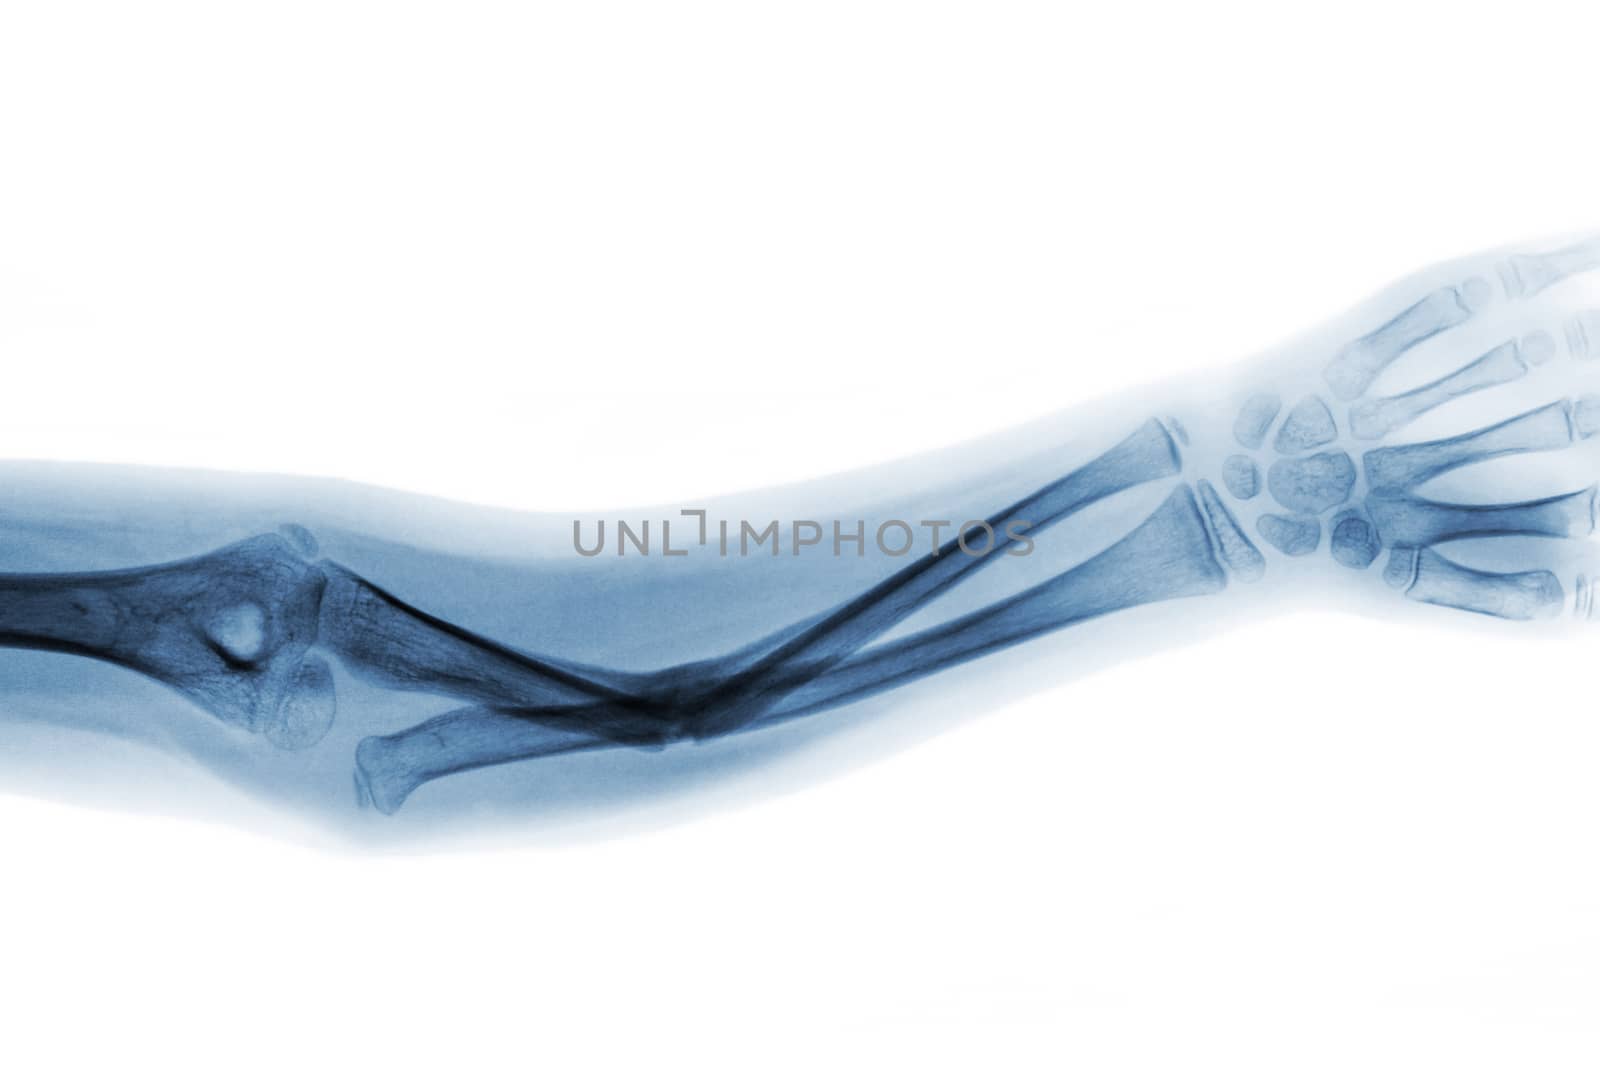 Film x-ray forearm AP show fracture shaft of ulnar bone by stockdevil